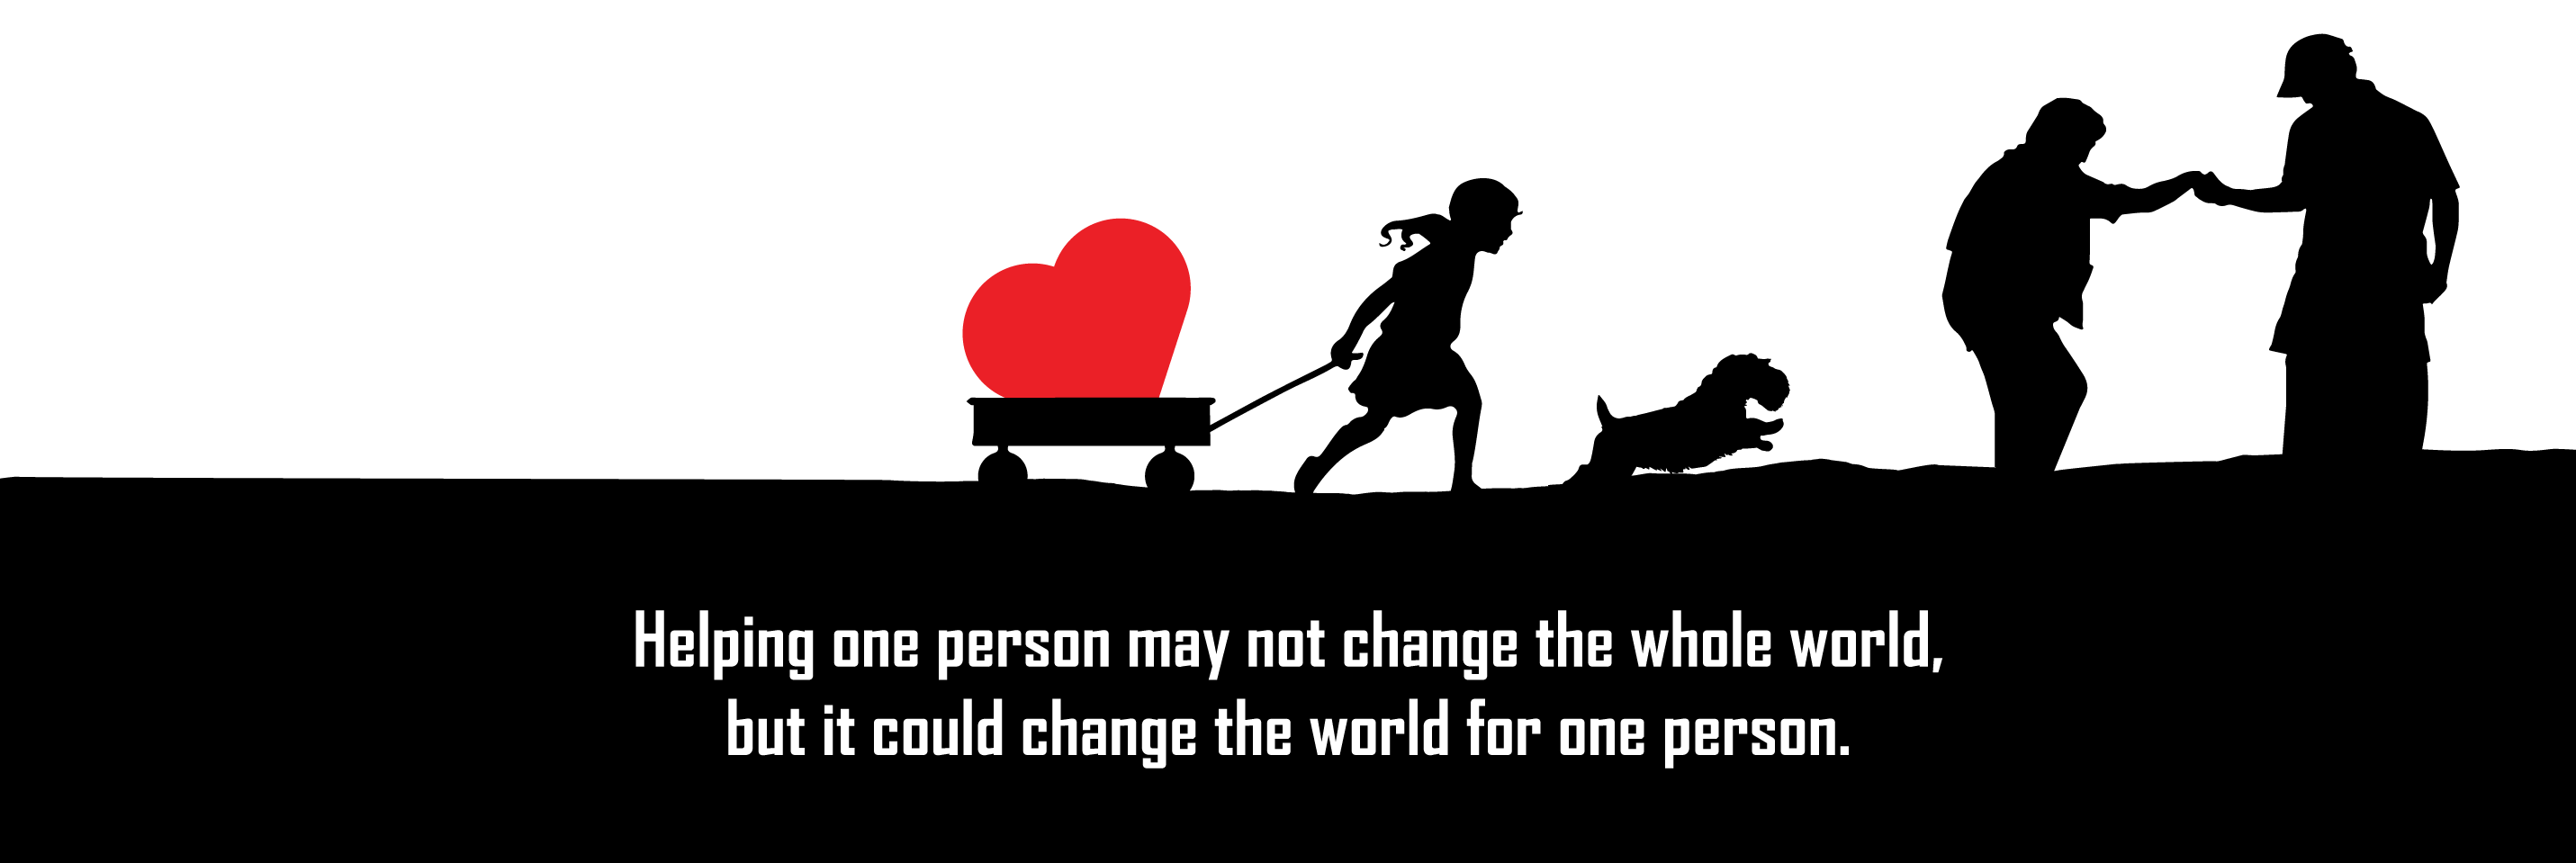 People Helping People International: Helping one person may not change the world, but it can change the world for one person.